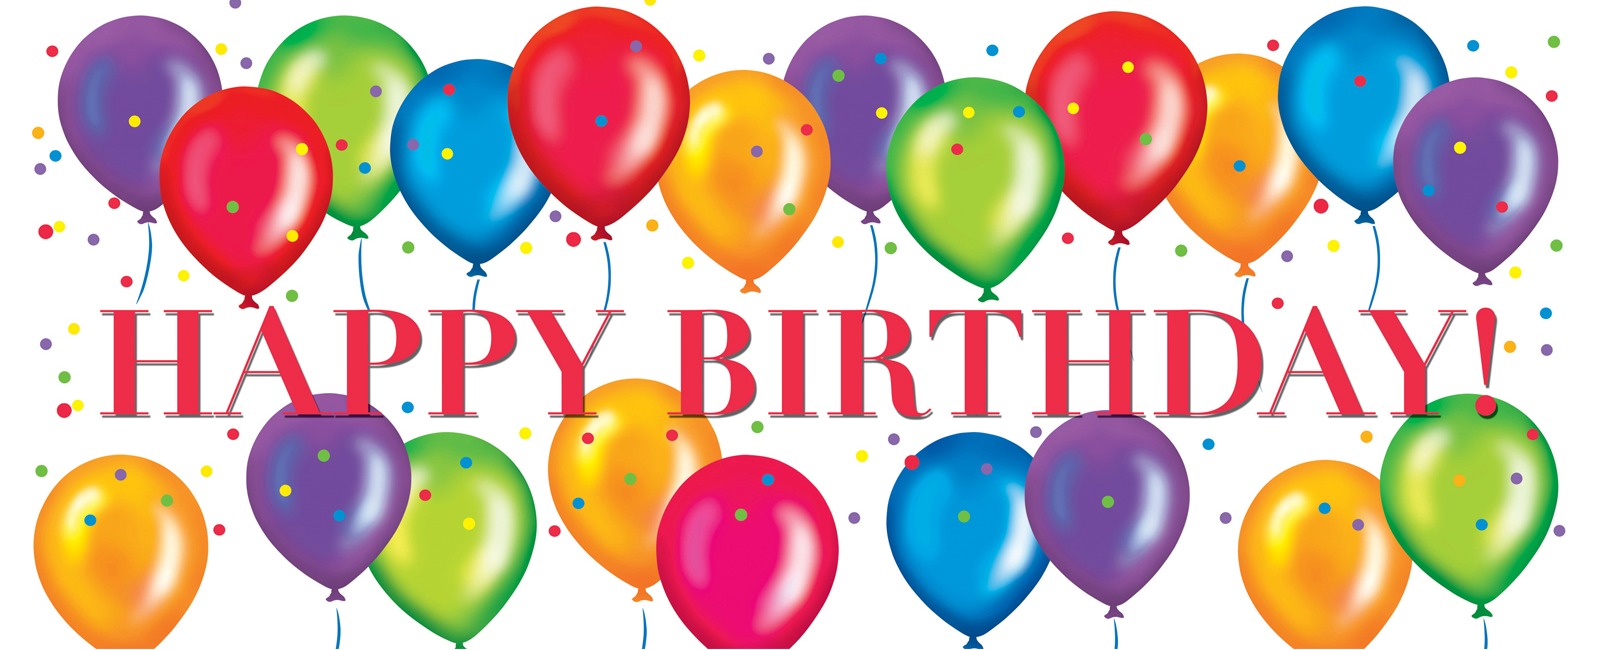 Happy Birthday Sign Template Word from clipart-library.com